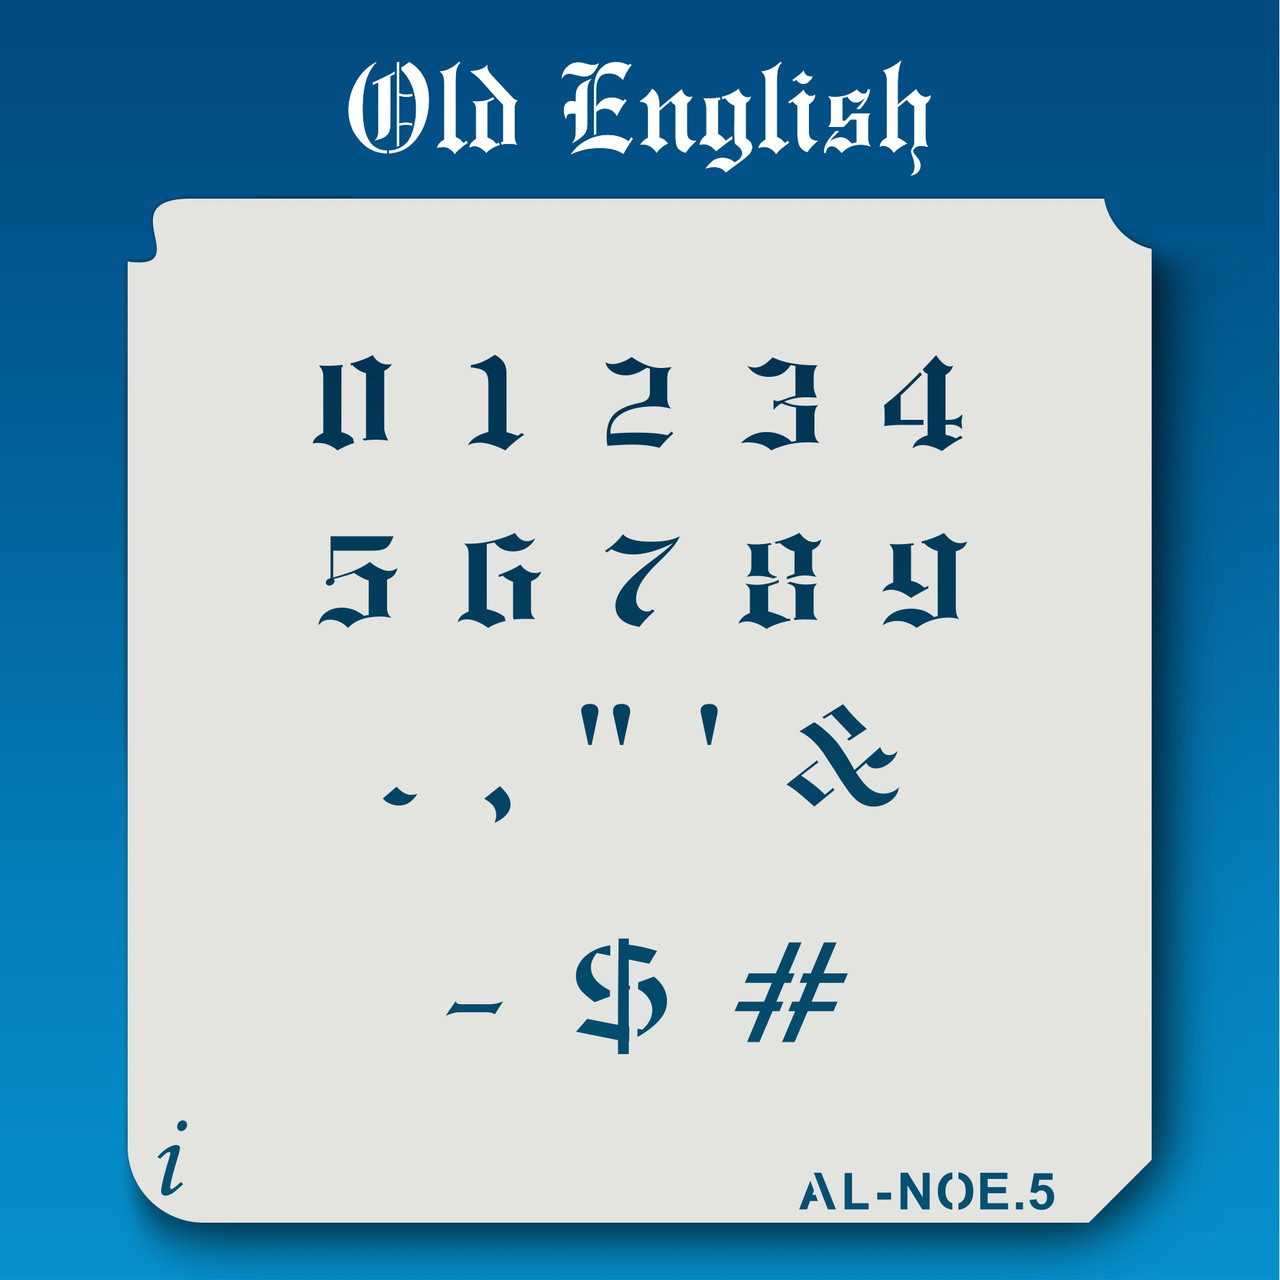 Old English Letter and Number Set